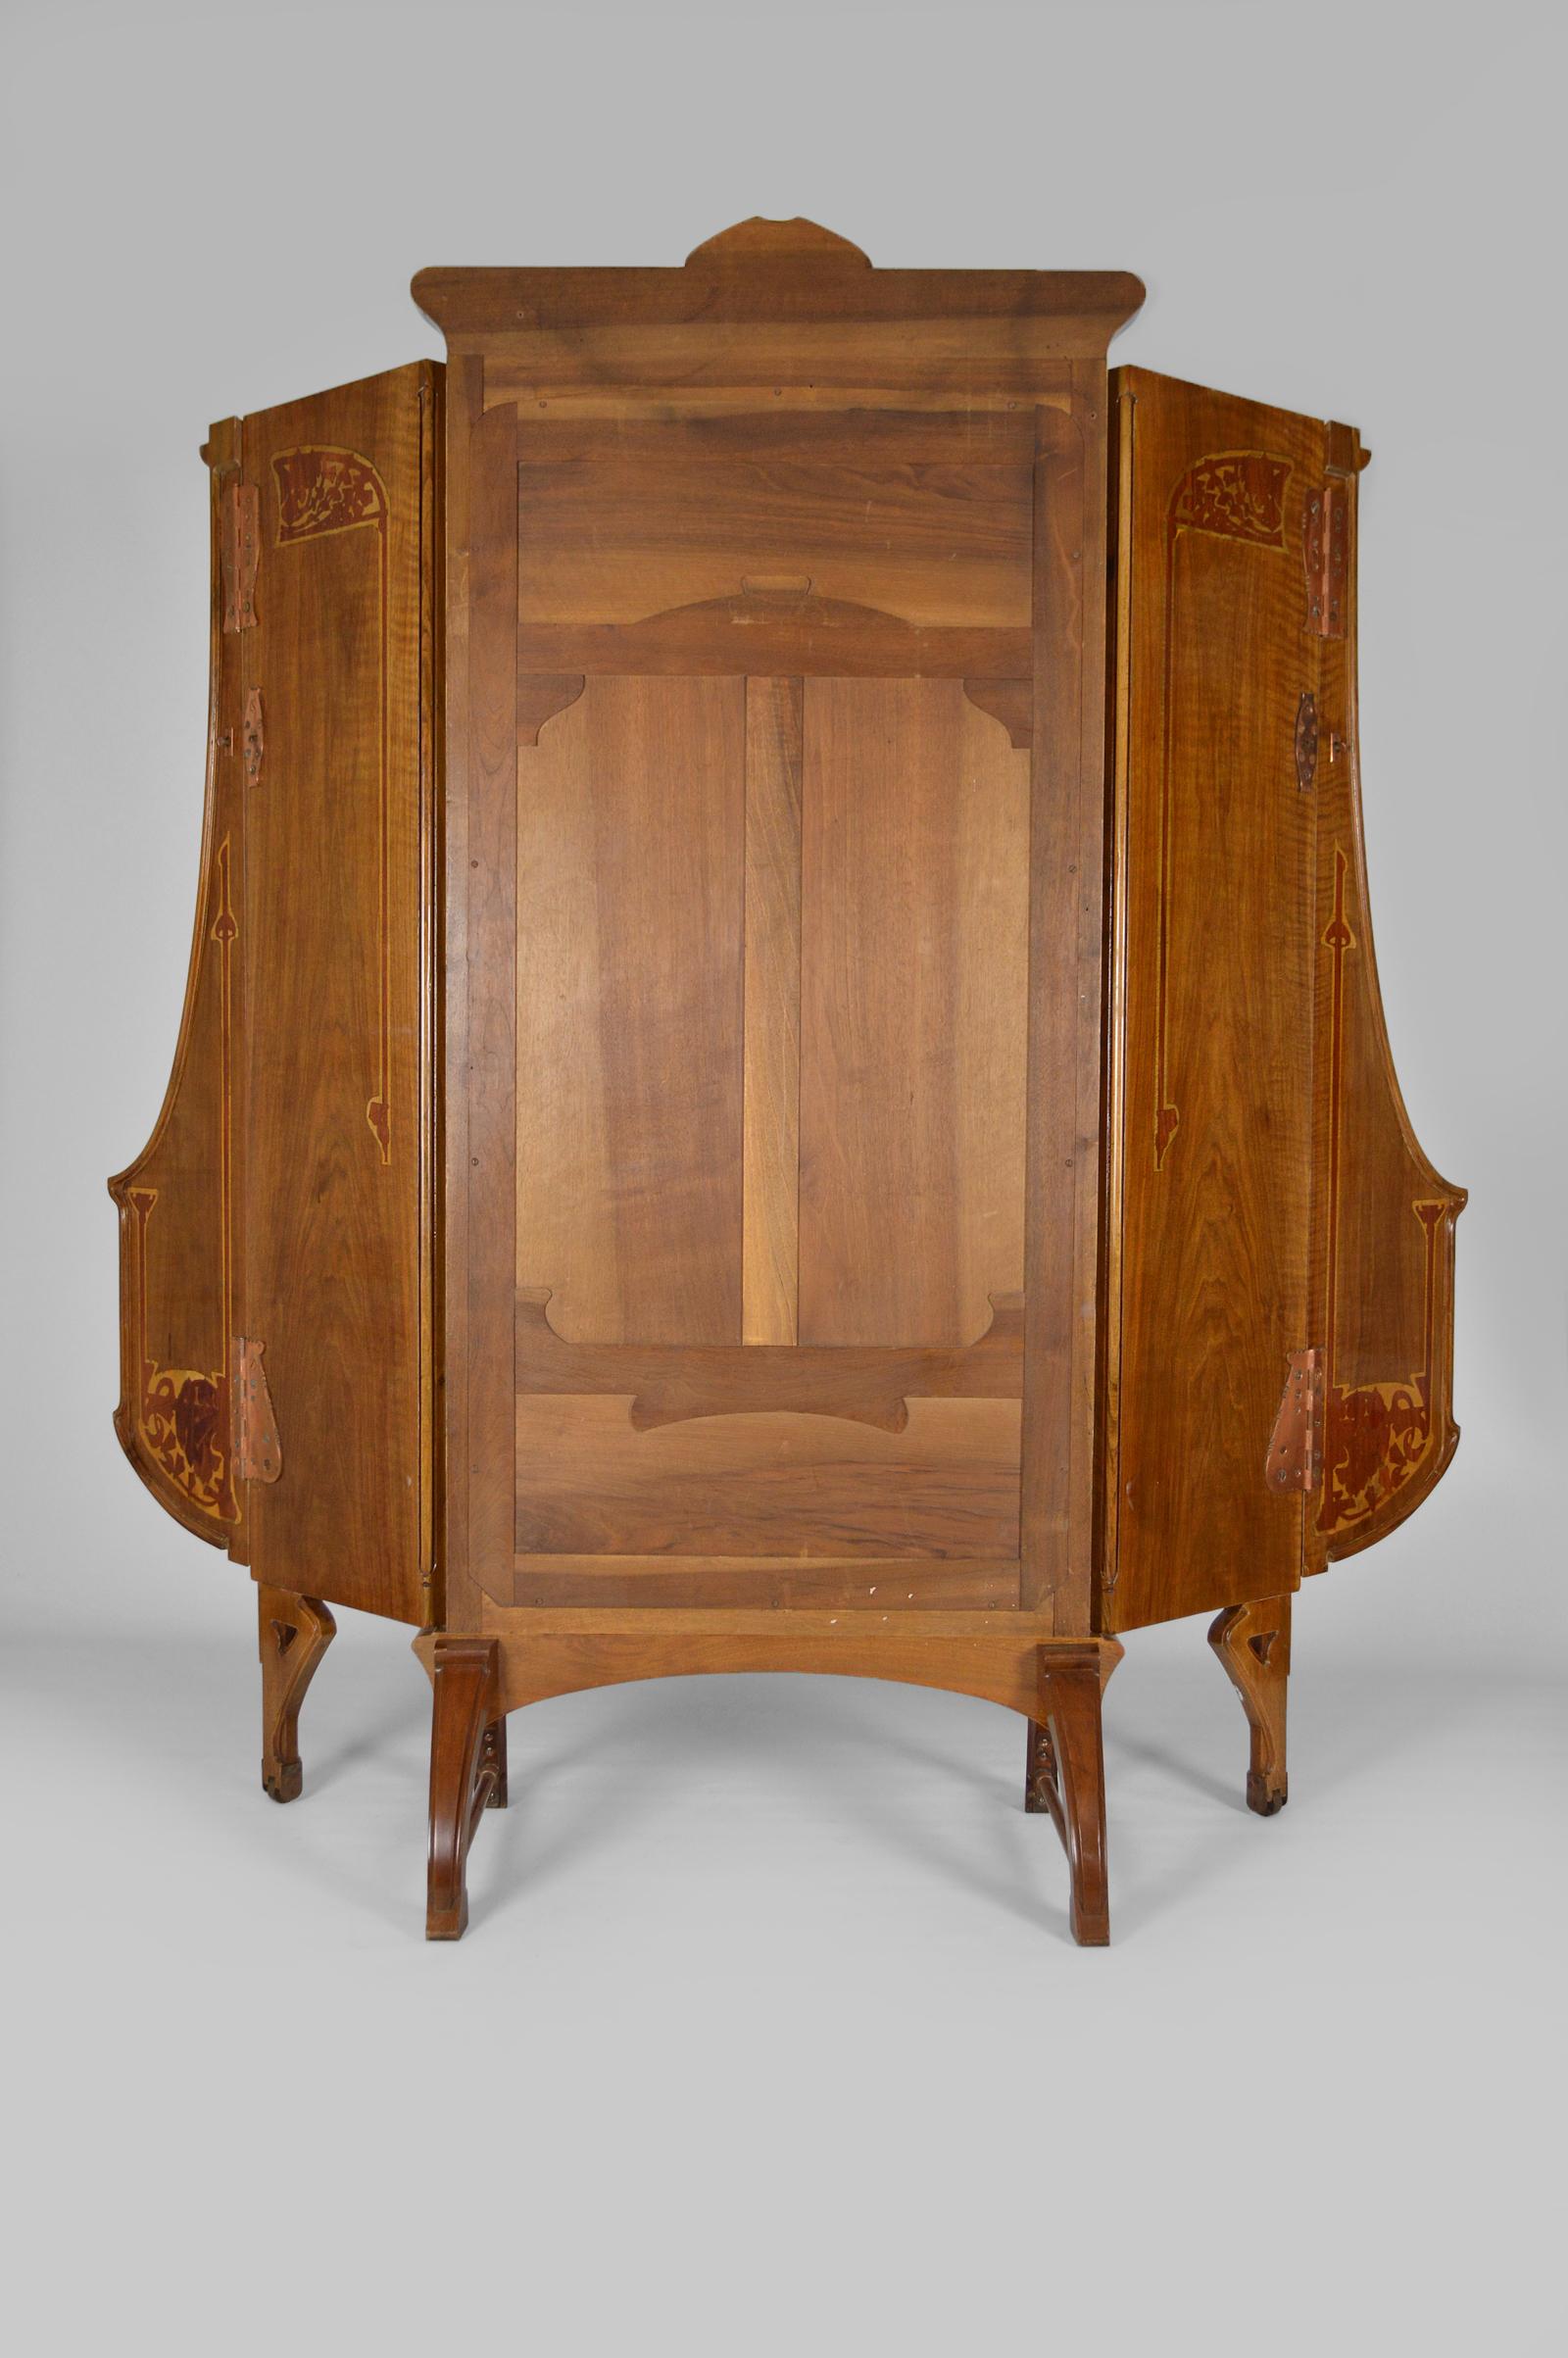 French Art Nouveau Cheval Mirror 5-Panel Screen / Vanity Dressing Table, 1901 For Sale 3